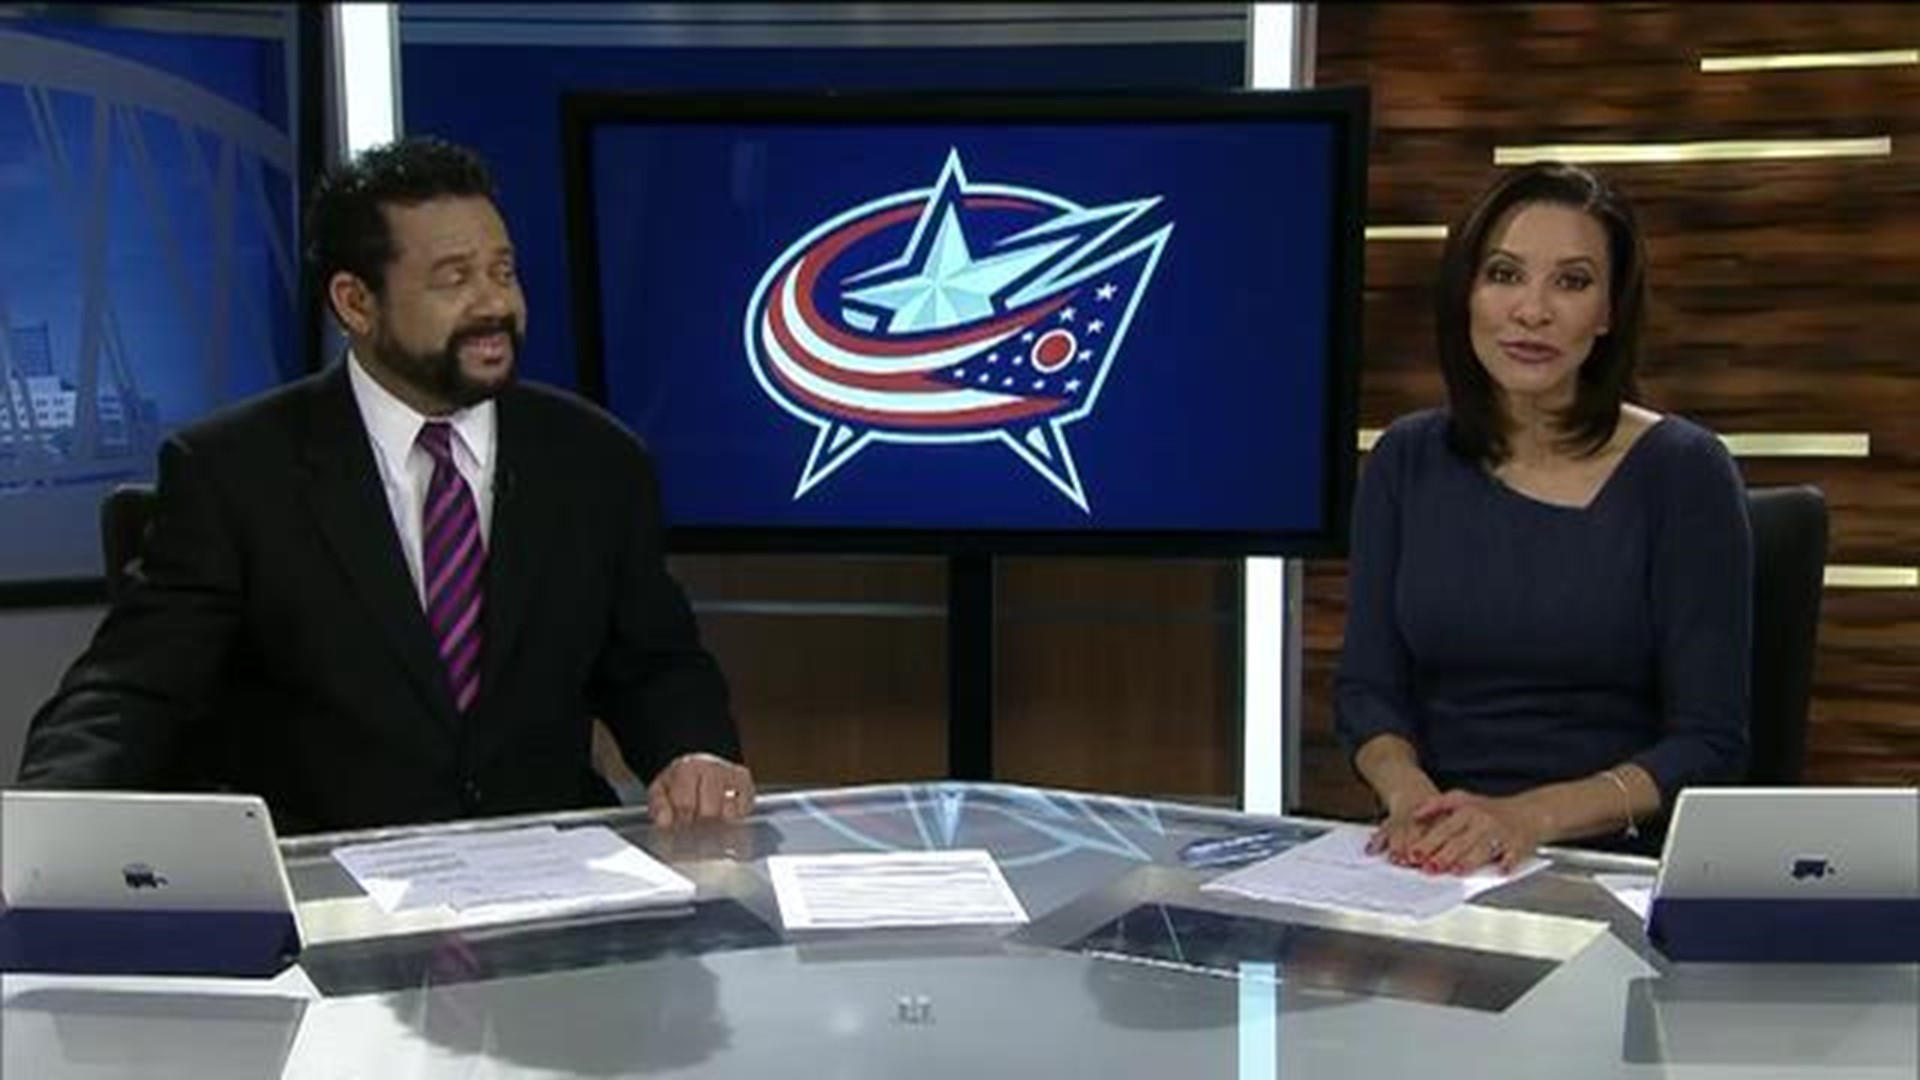 The story behind the Blue Jackets' cannon